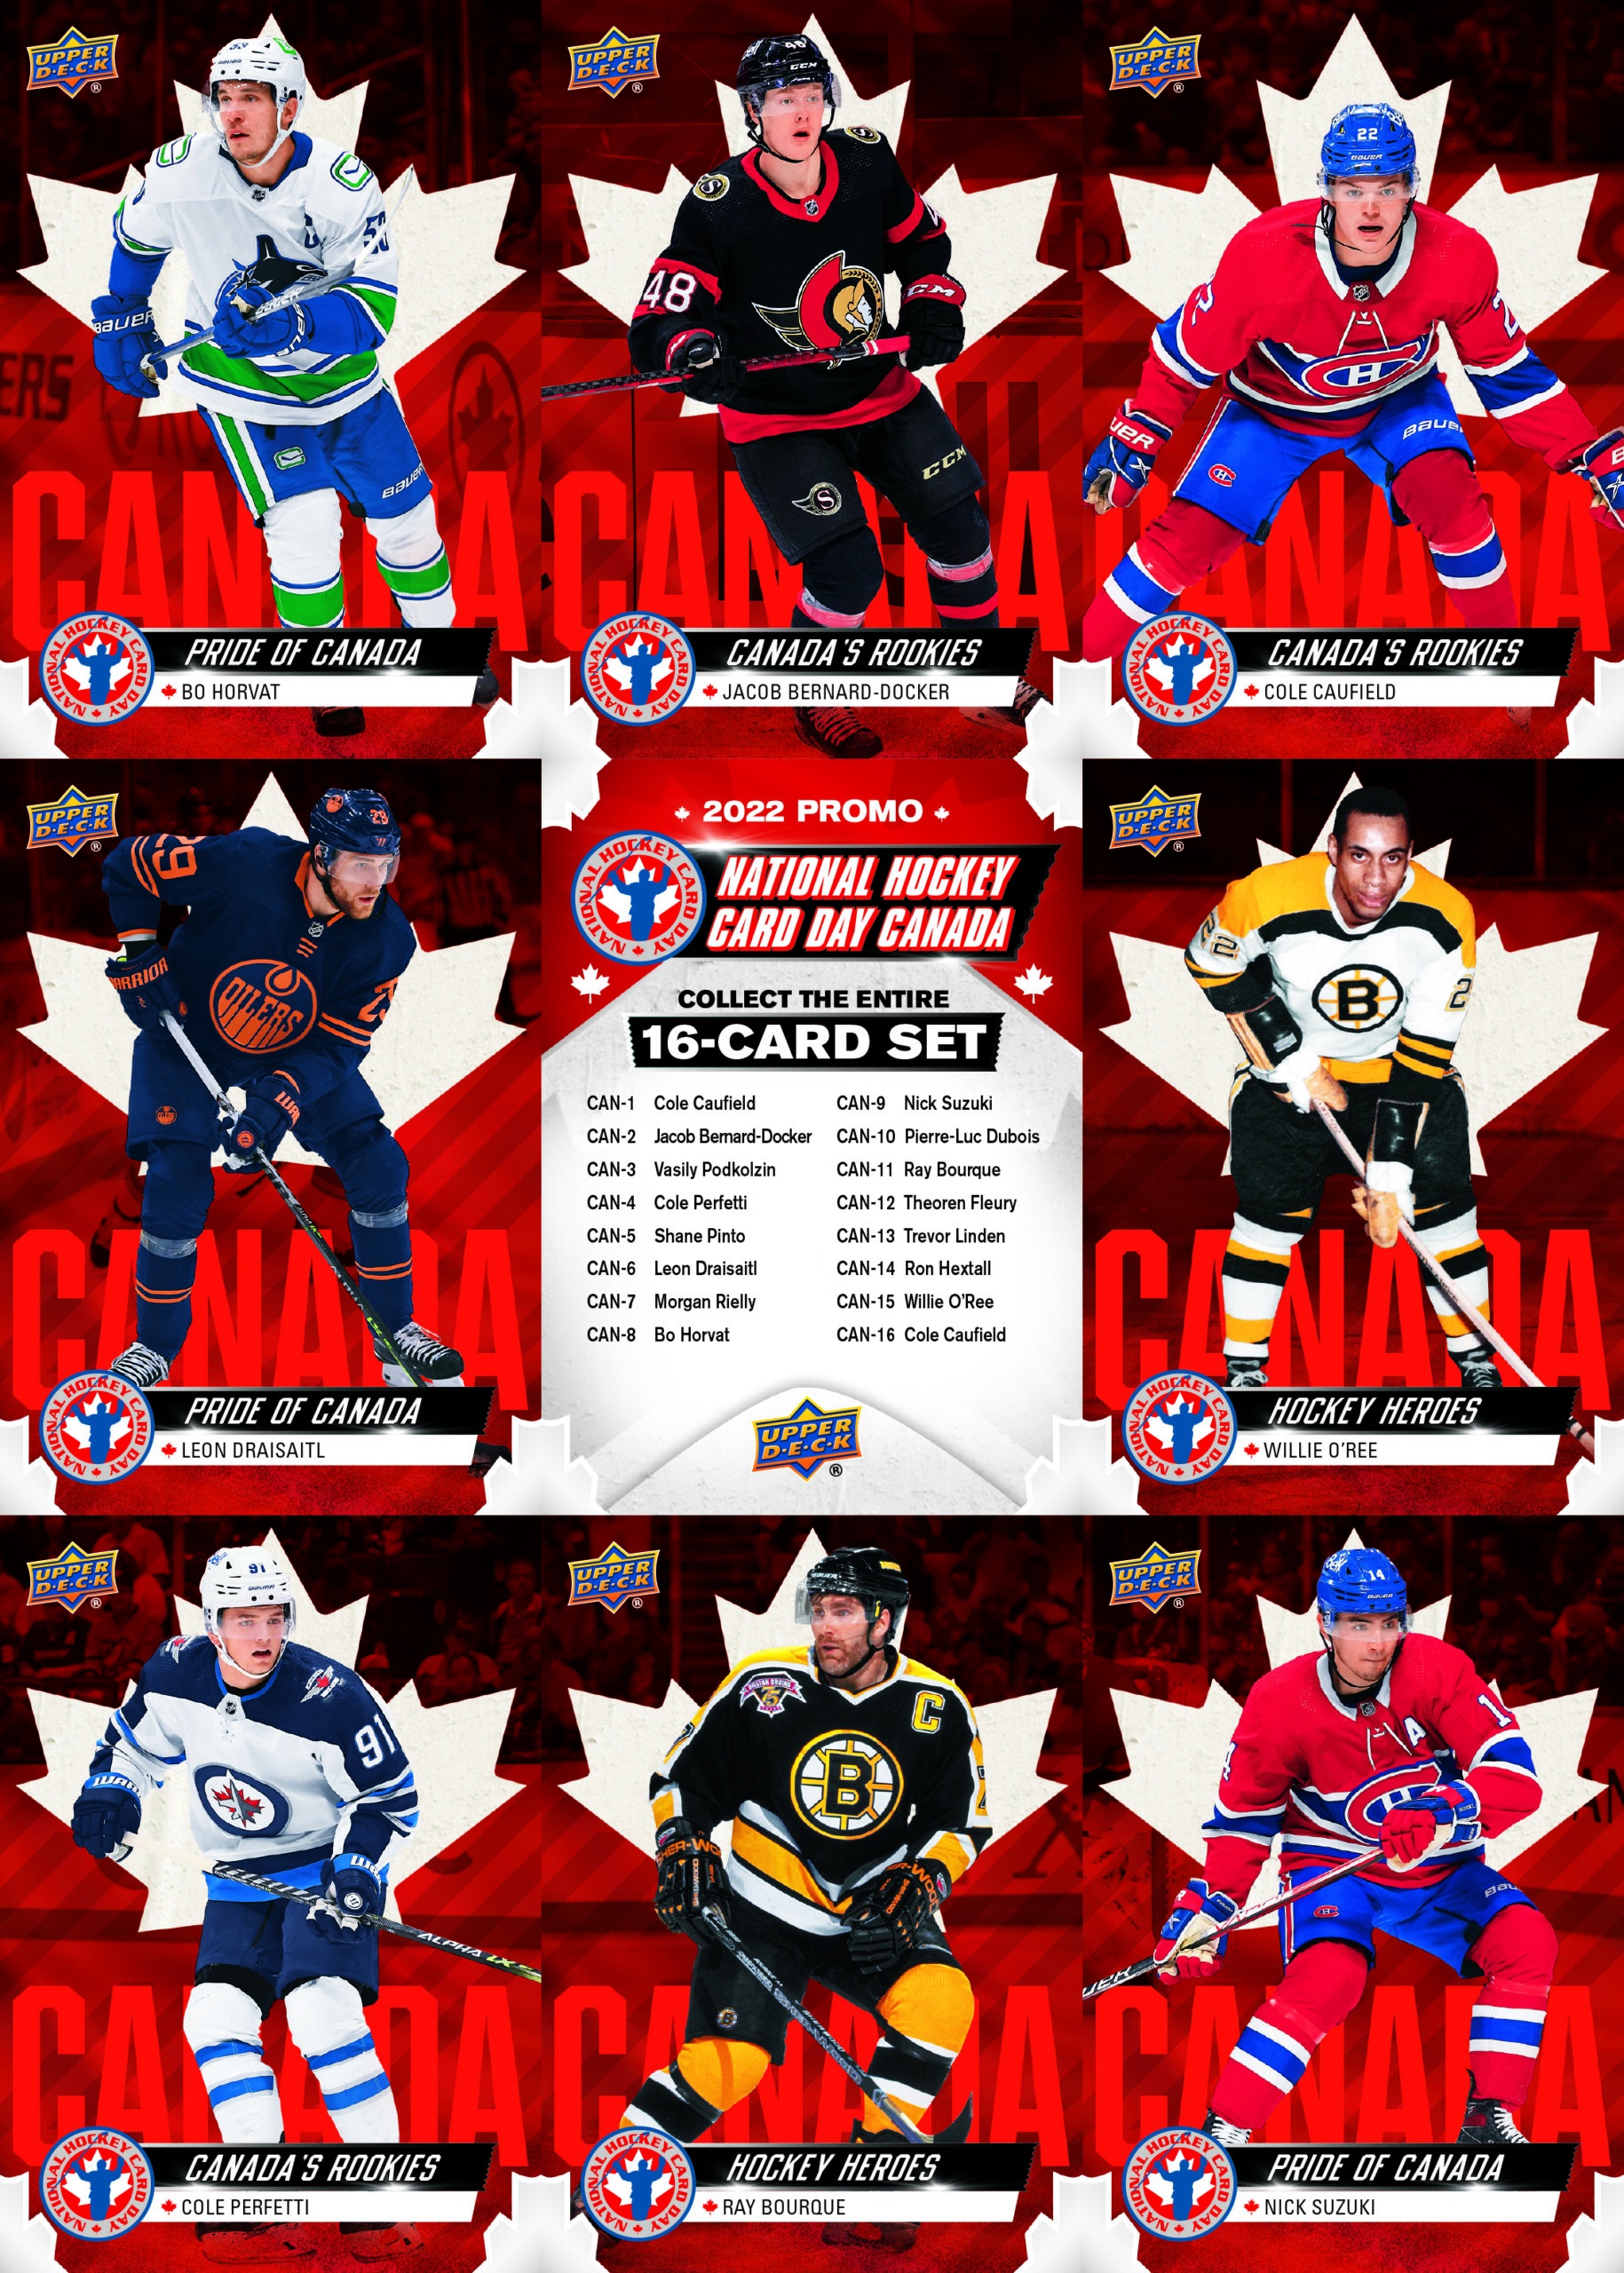 NATIONAL HOCKEY CARD DAY 2022 IS ALMOST HERE! READ BELOW FOR ALL